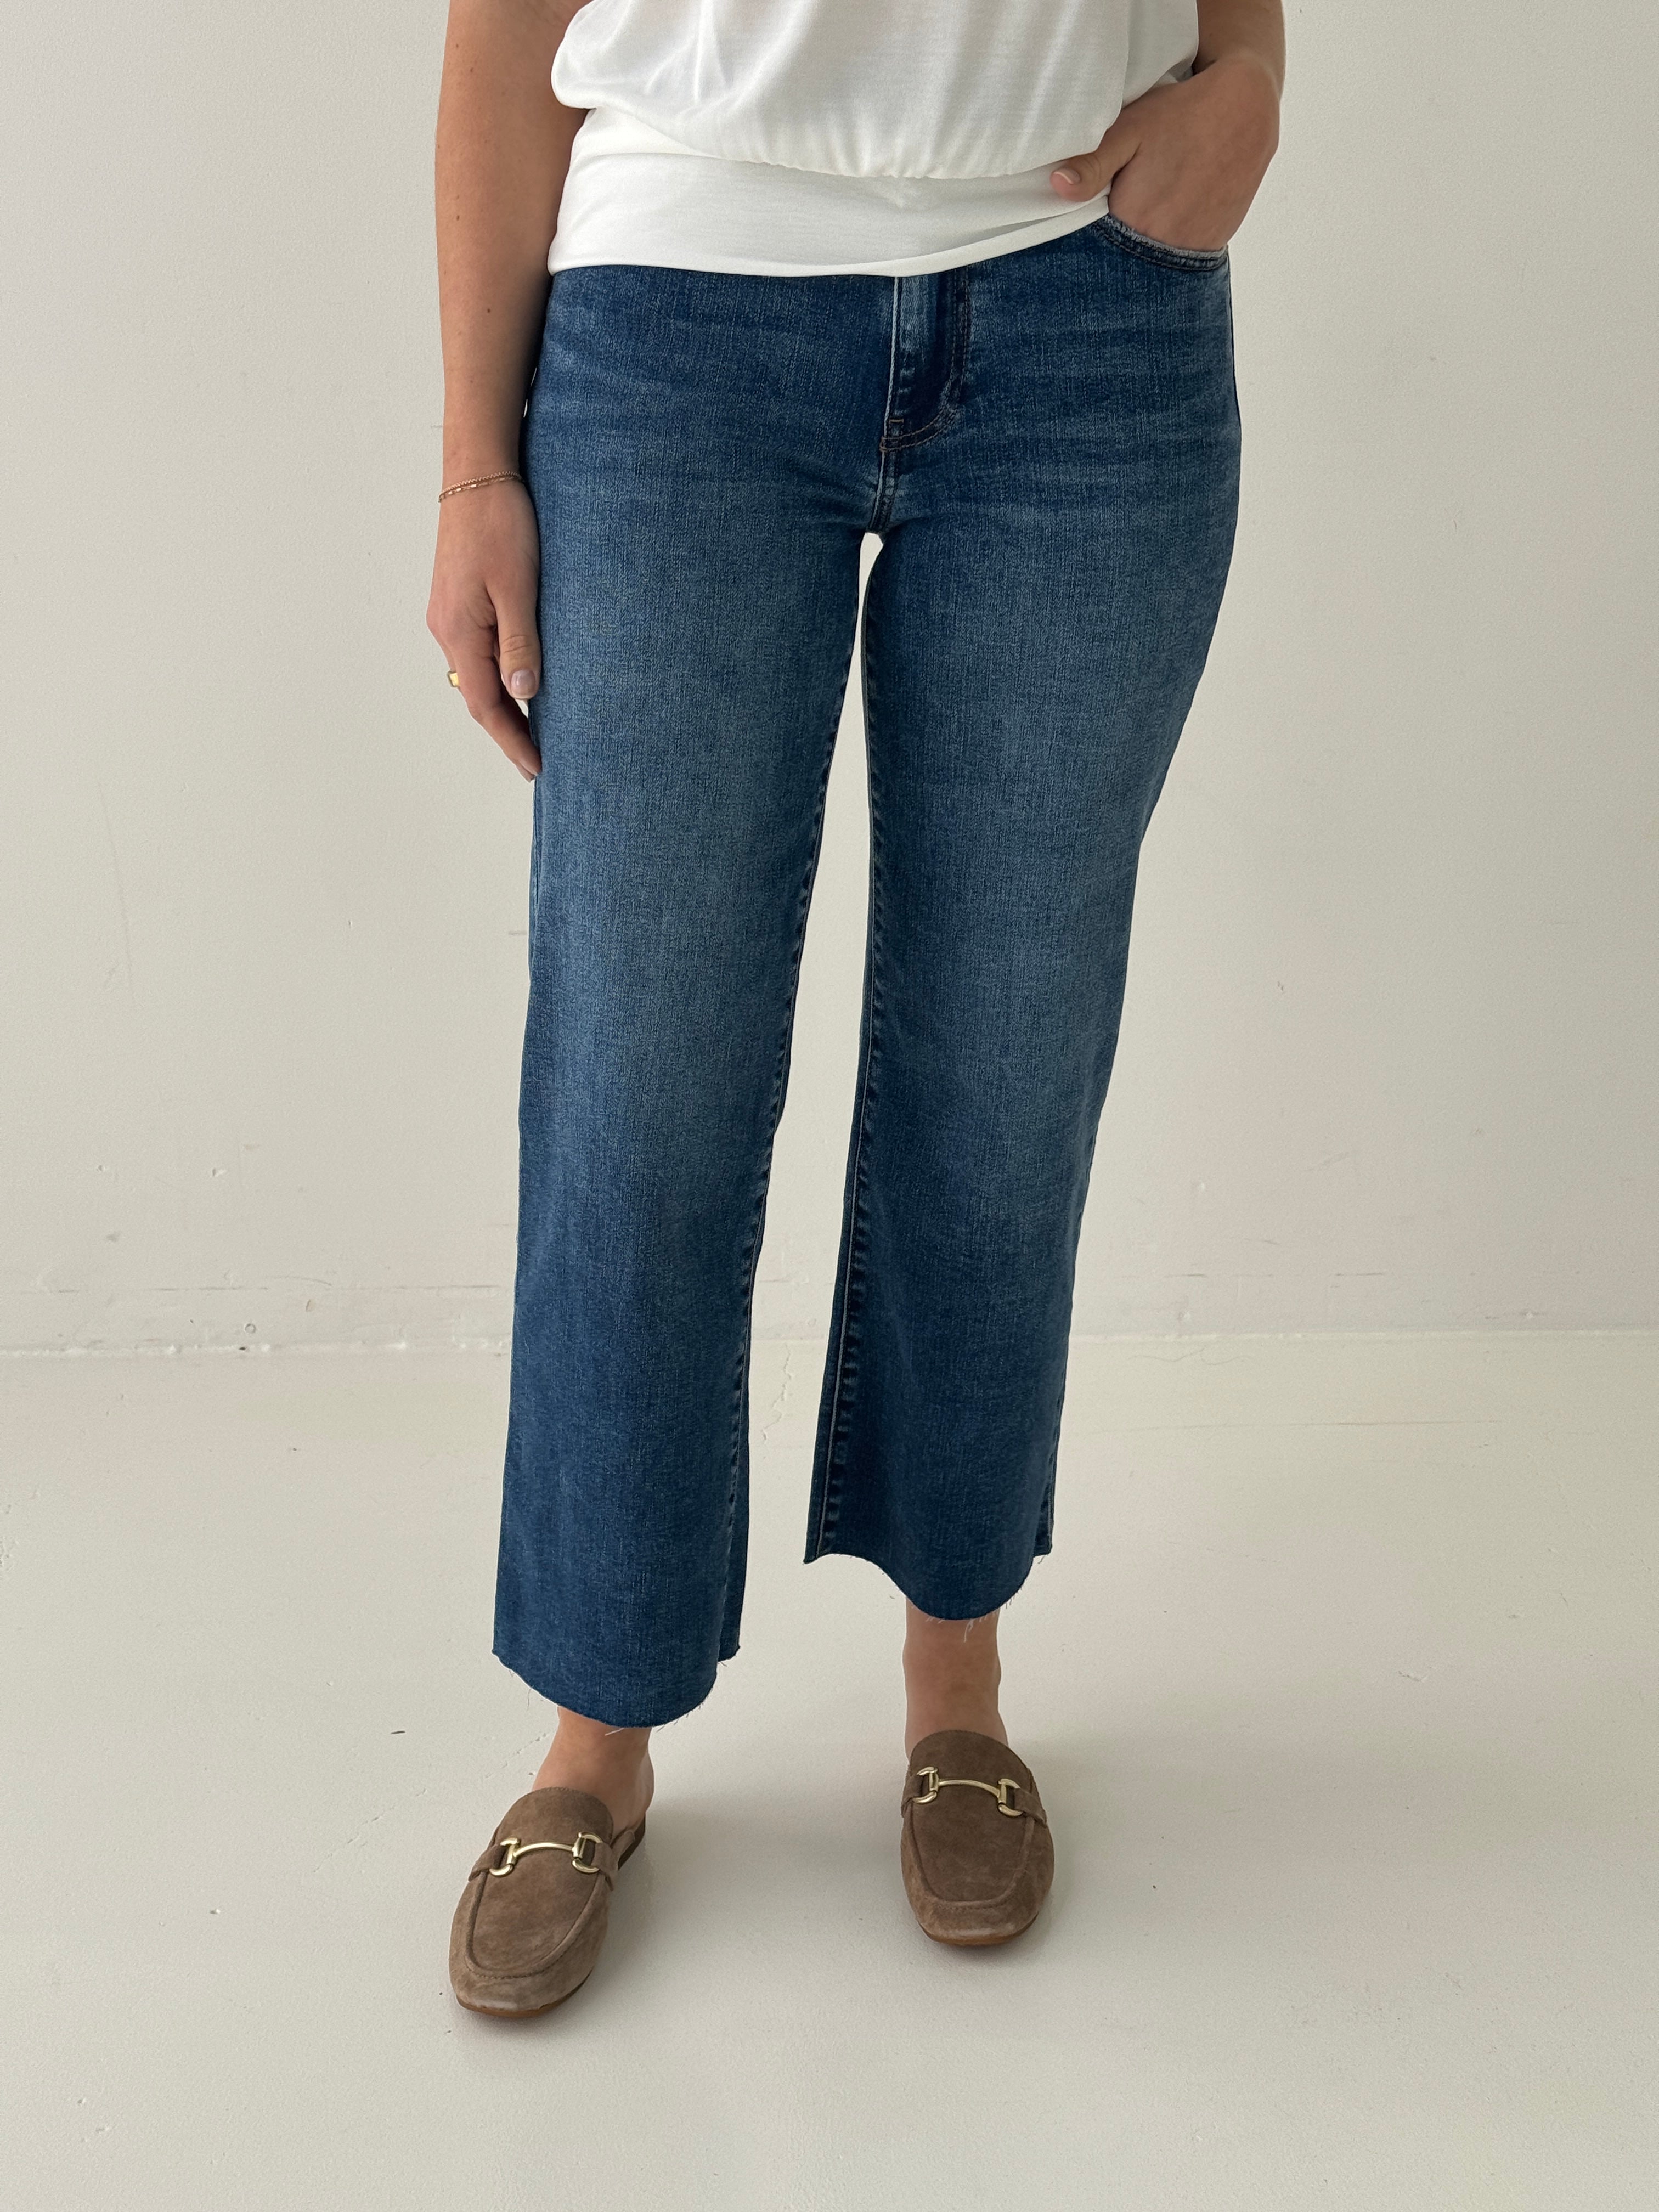 Kut Charlote High Rise Coulottes in Commenatory Wash-210 Denim-Little Bird Boutique